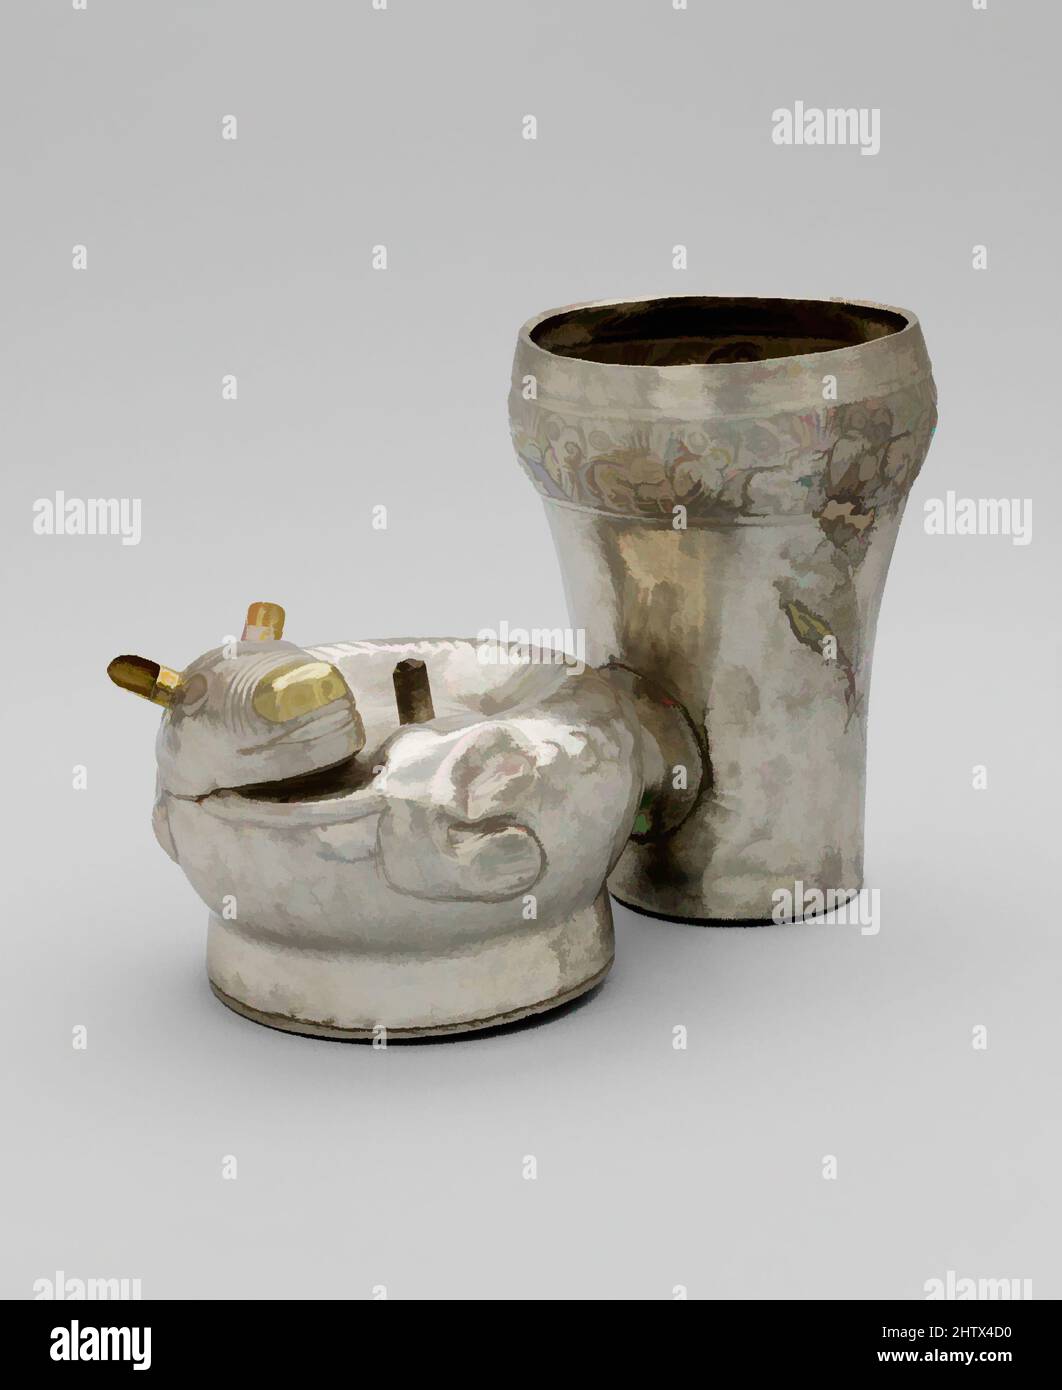 Art inspired by Double Vessel, Dog, 14th–15th century, Peru, Chimú, Silver, gold, H. 5 1/8 x W. 3 3/4 x D. 7 1/2 in. (13 x 9.5 x 19.1 cm), Metal-Containers, Classic works modernized by Artotop with a splash of modernity. Shapes, color and value, eye-catching visual impact on art. Emotions through freedom of artworks in a contemporary way. A timeless message pursuing a wildly creative new direction. Artists turning to the digital medium and creating the Artotop NFT Stock Photo